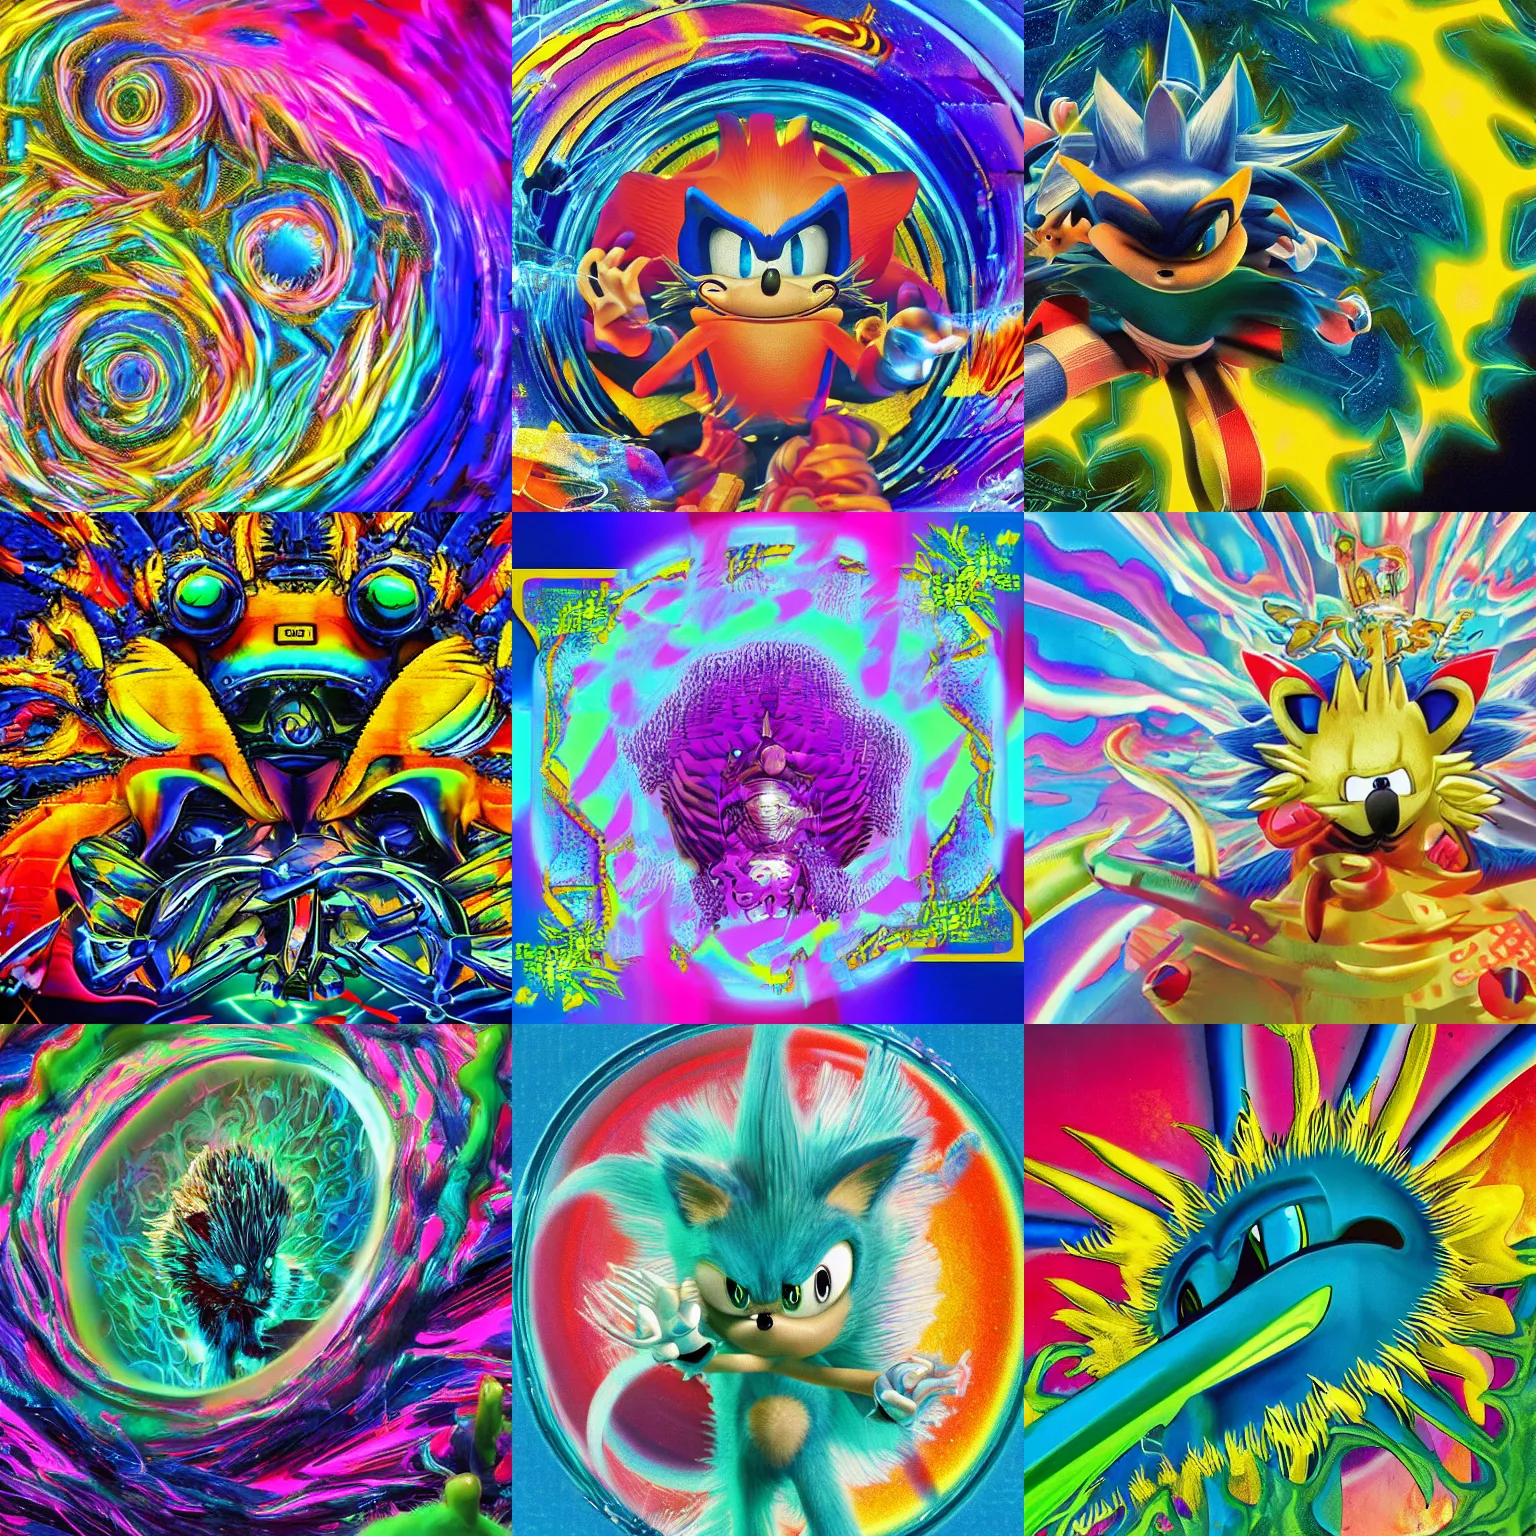 Prompt: close up sonic the hedgehog in a surreal, soft, neon, beveled spiral fractals, professional, high quality airbrush art mgmt shpongle album cover of a chrome dissolving LSD DMT blue sonic the hedgehog surfing through vaporwave caves, checkerboard horizon , 1990s 1992 Sega Genesis video game album cover